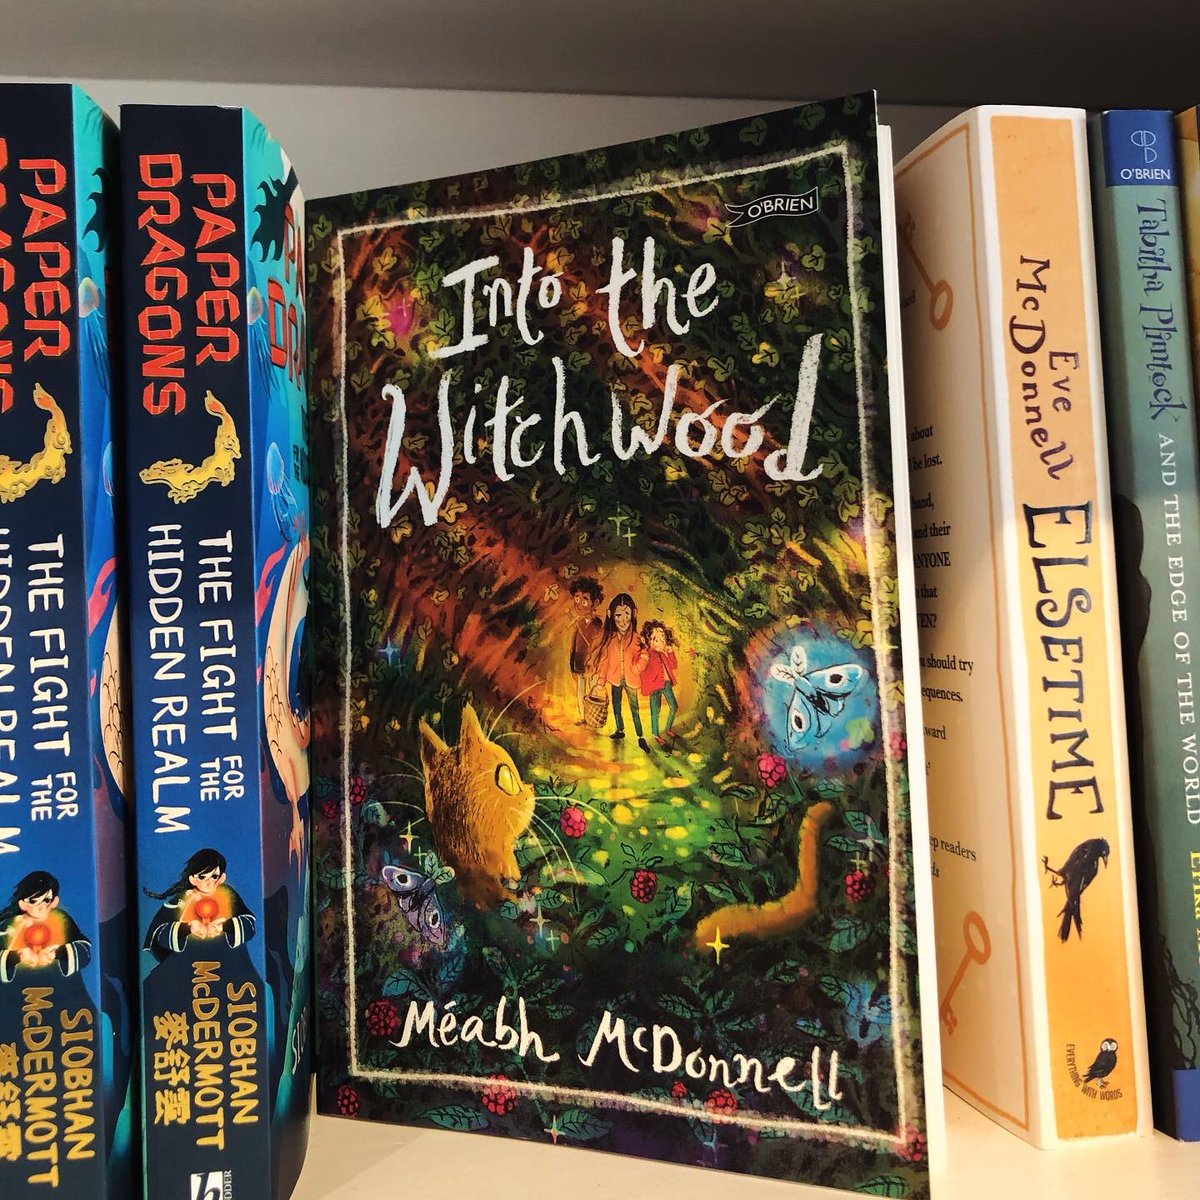 Wonderful to have so many children’s authors @HalfwayUpBooks yesterday to celebrate Into the Witchwood - @meabhmcdonnell ‘s debut. Thanks to @AlNolan @Eve_Mc_Donnell @aliwea and @samblakebooks for a lovely lunch celebration! Signed copies of all their books now in store!